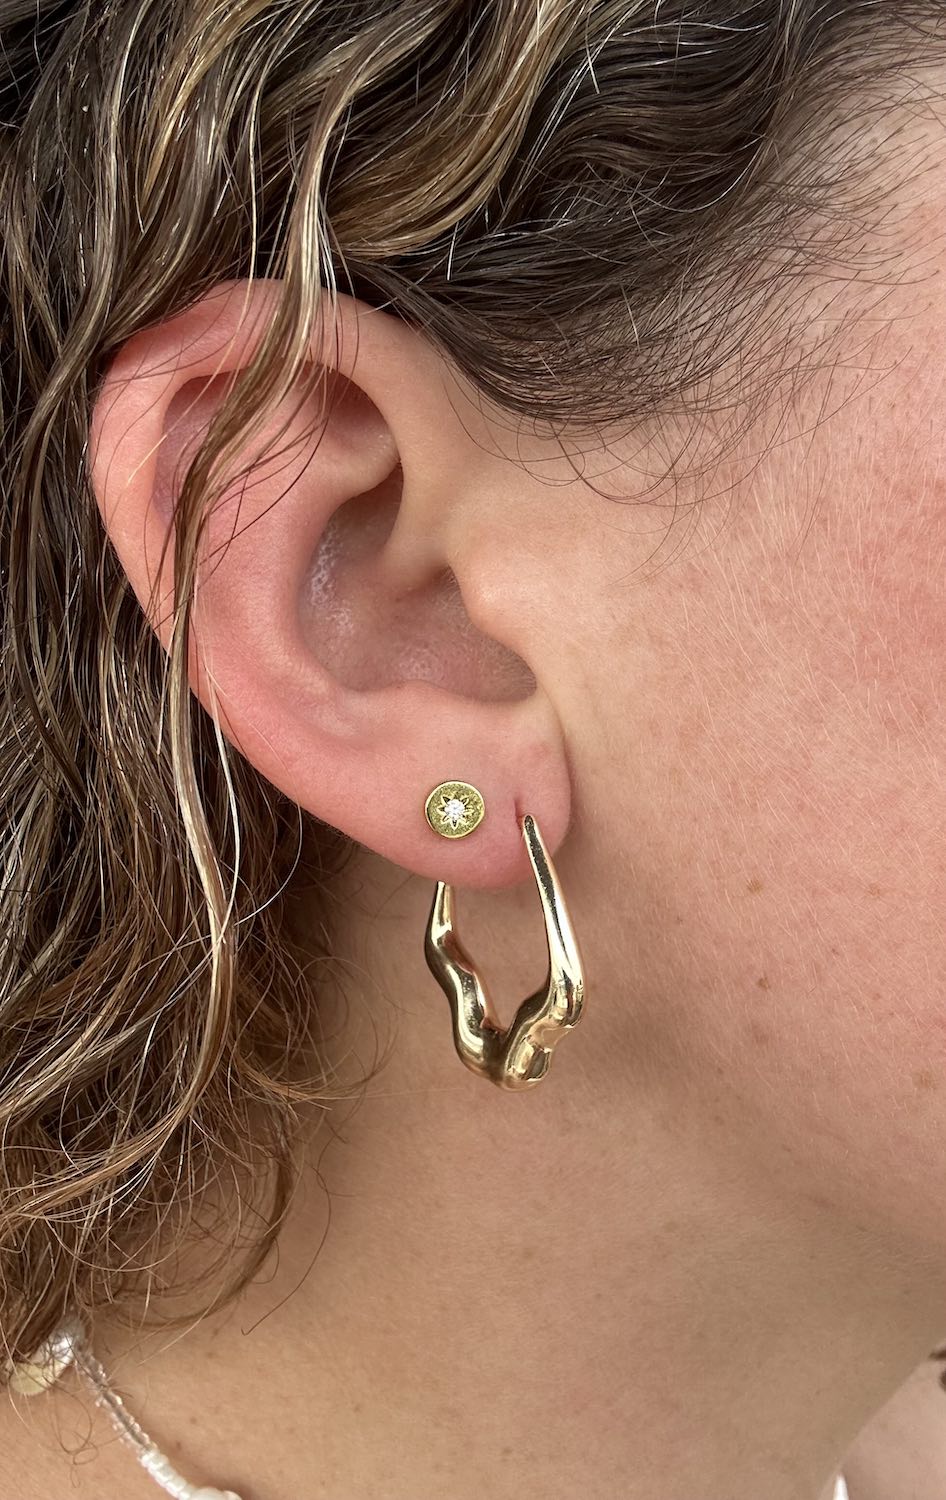 Wavelength earrings - 18k gold plated hoops with stud back